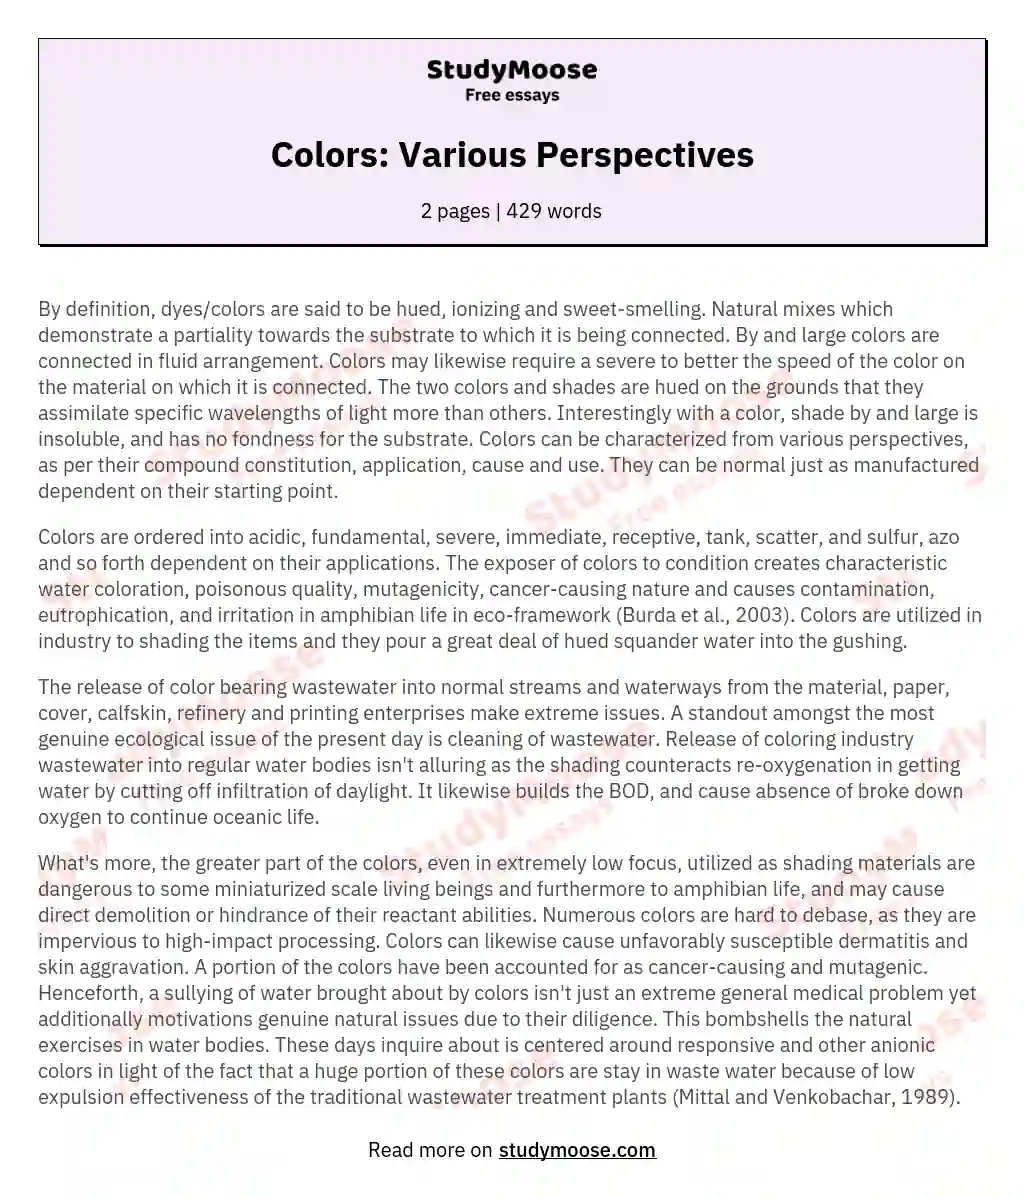 Colors: Various Perspectives essay